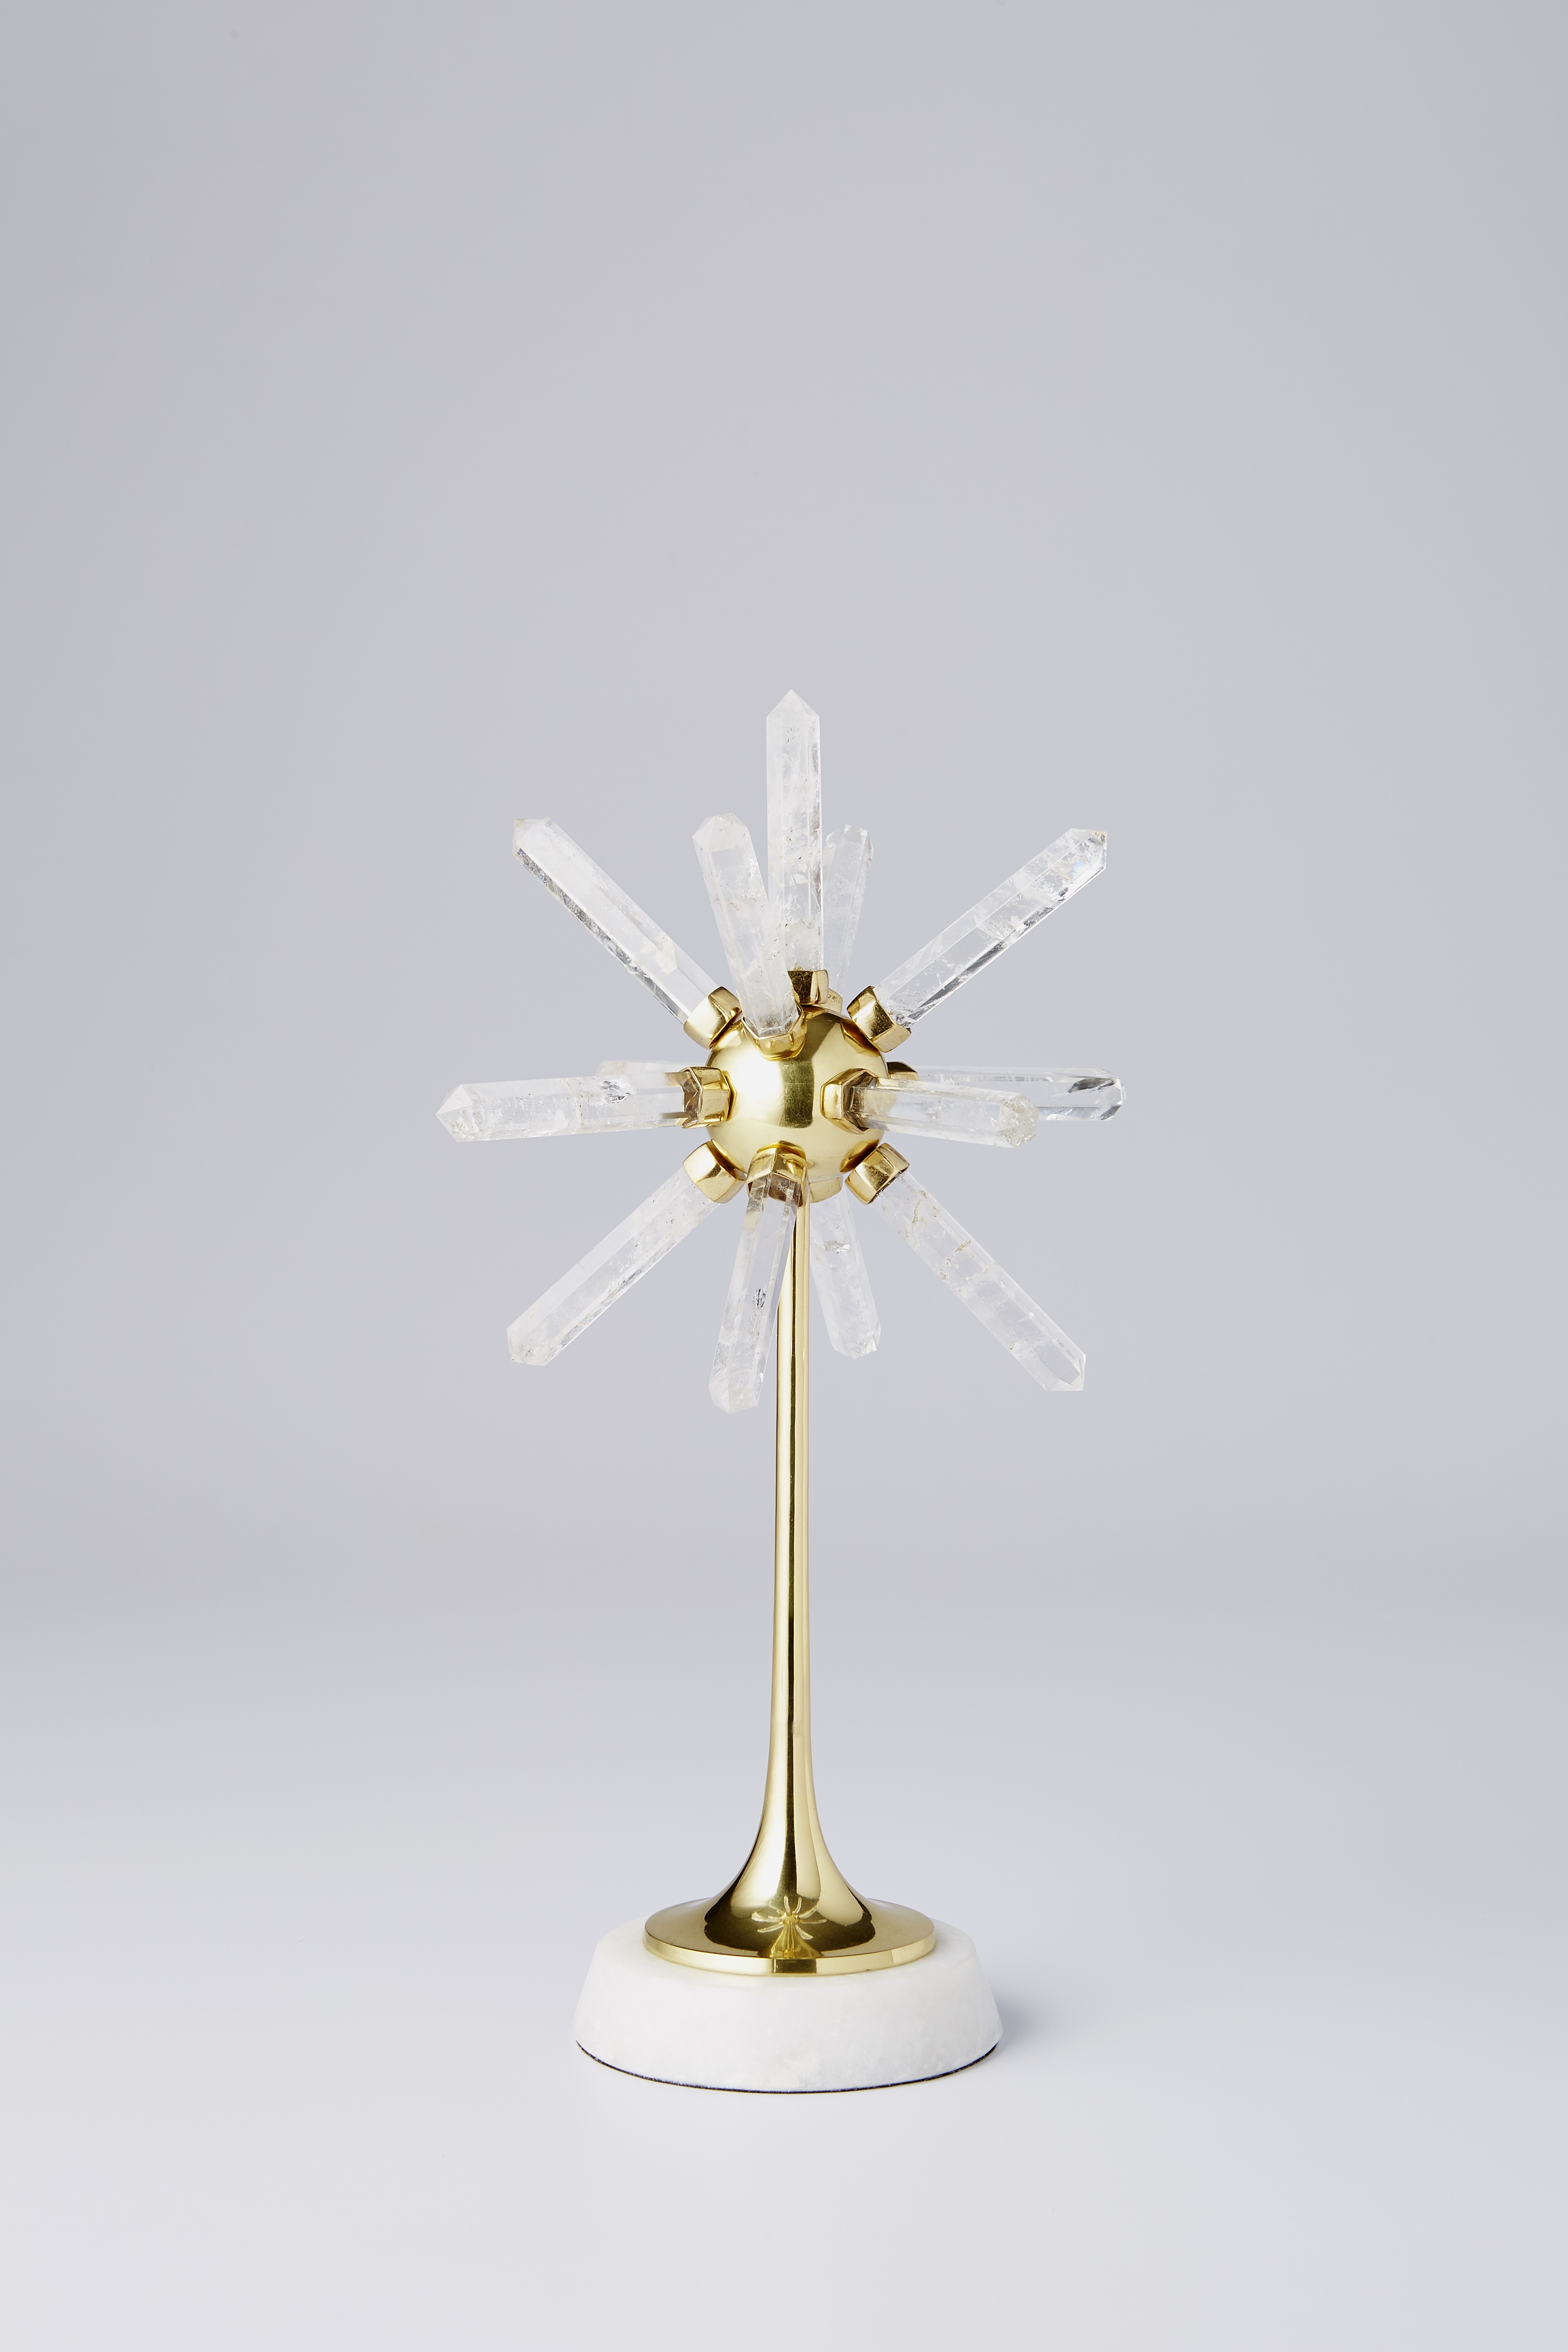 Quartz Star sculpture with a marble base and gold finish from Handley Drive